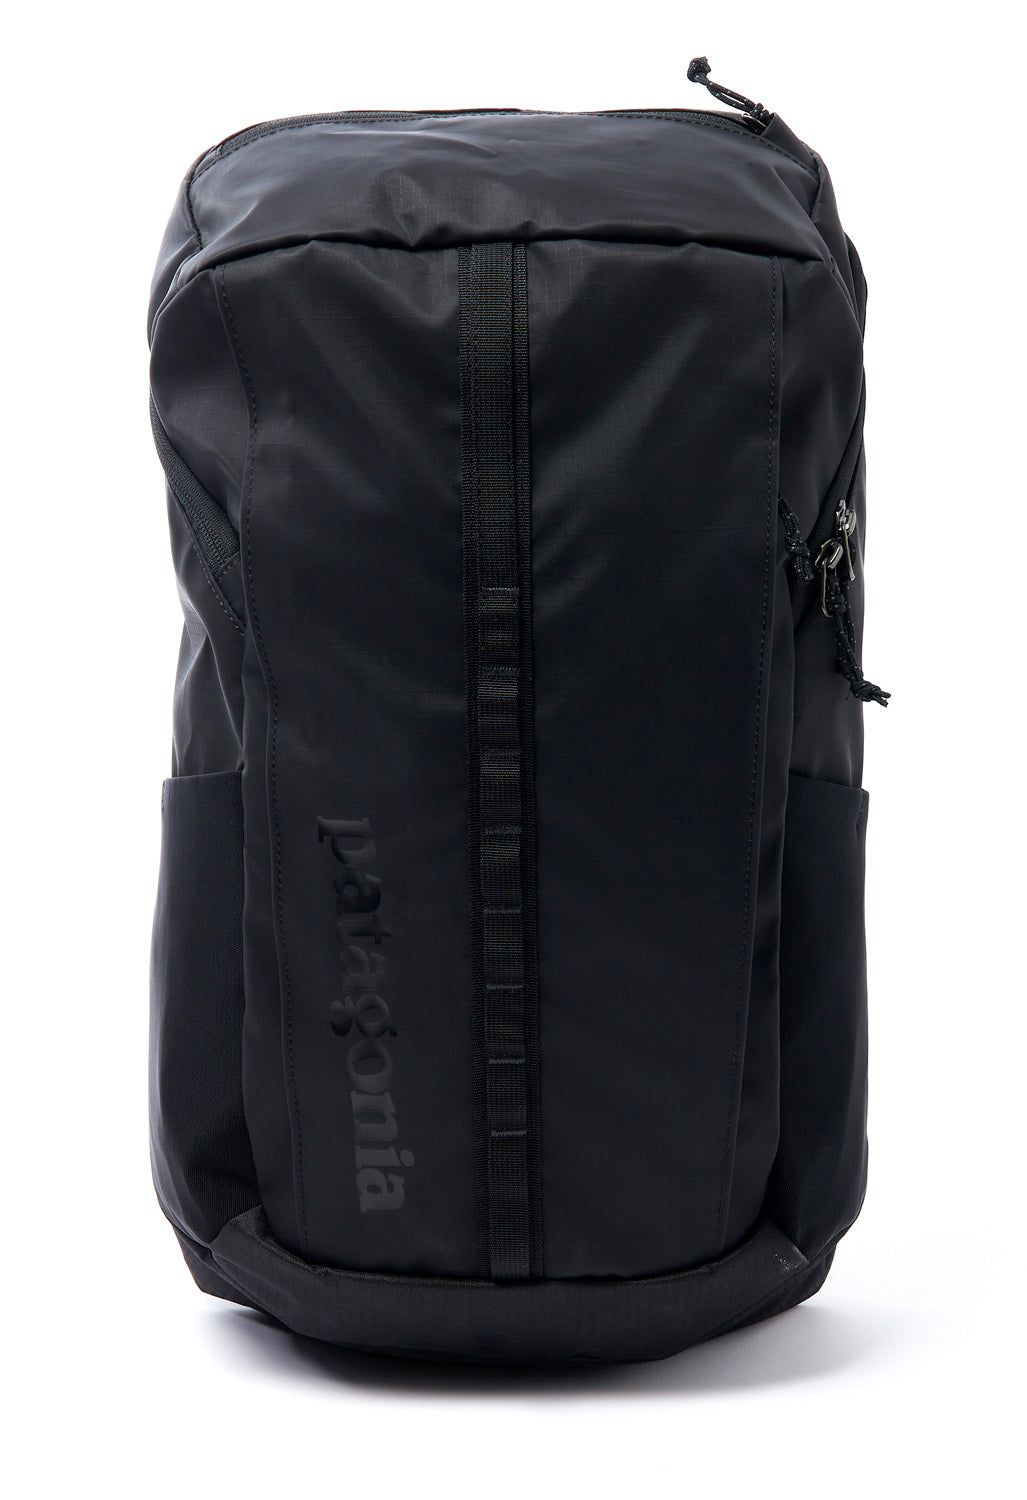 Patagonia Black Hole Pack 25L – Outsiders Store UK